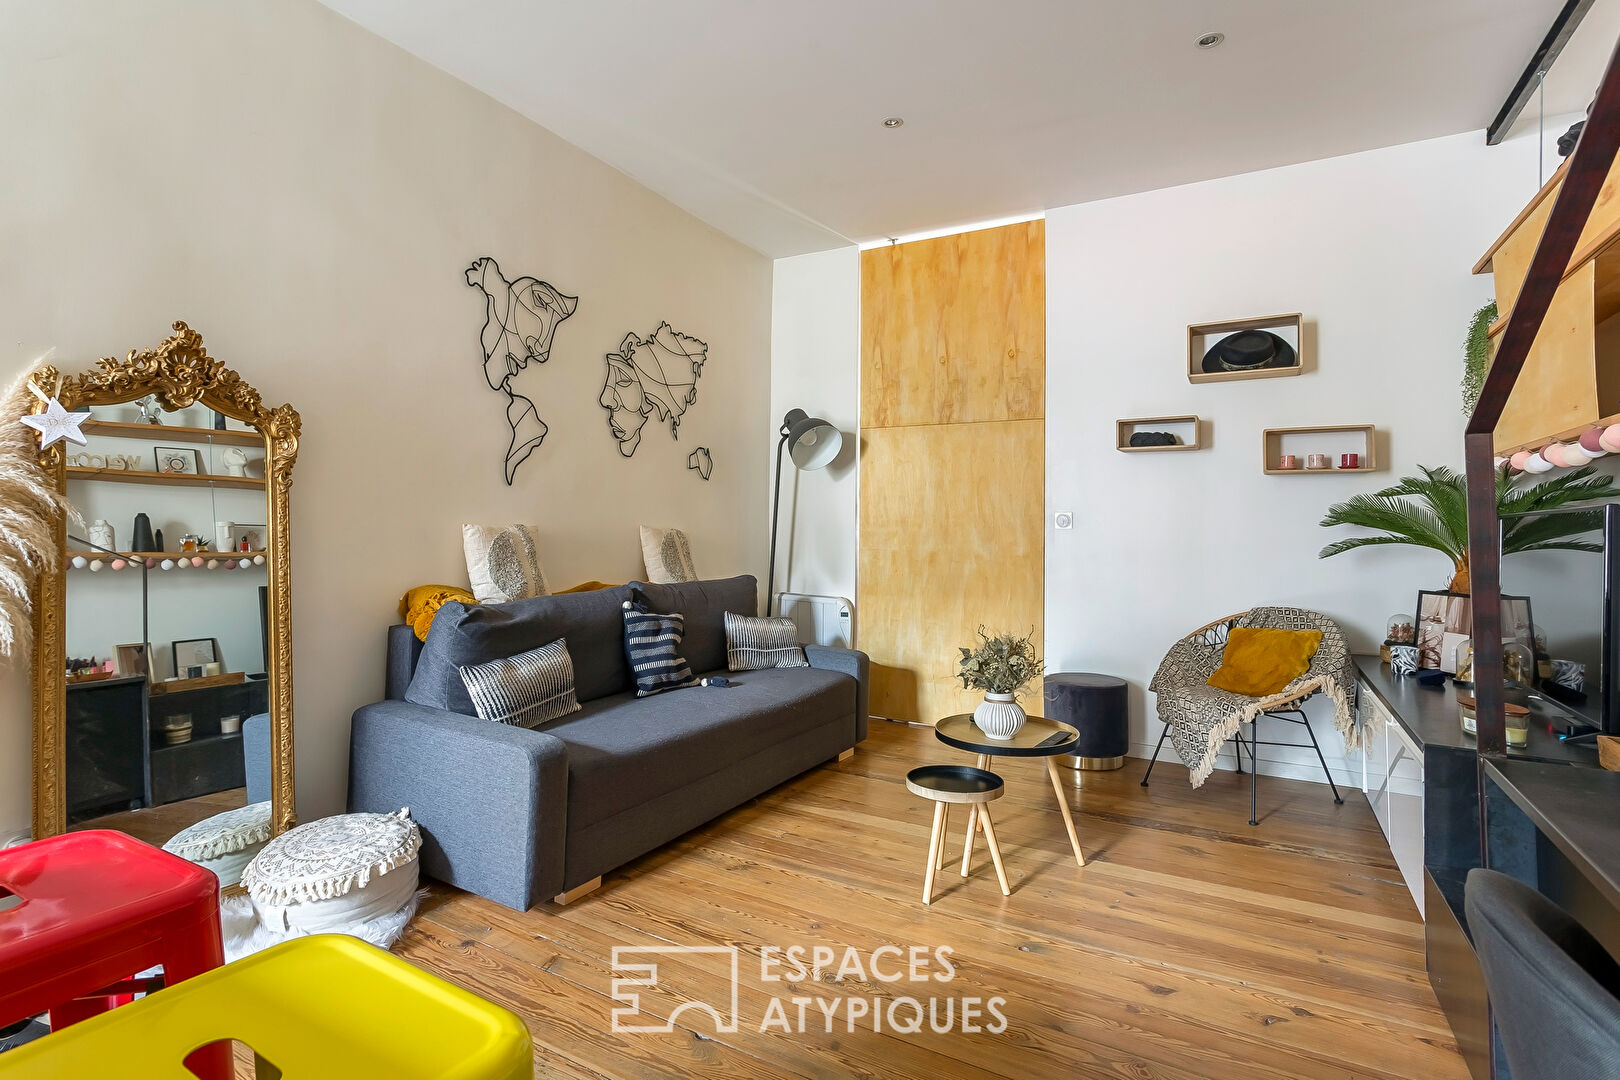 Architectural renovation in the heart of Monplaisir